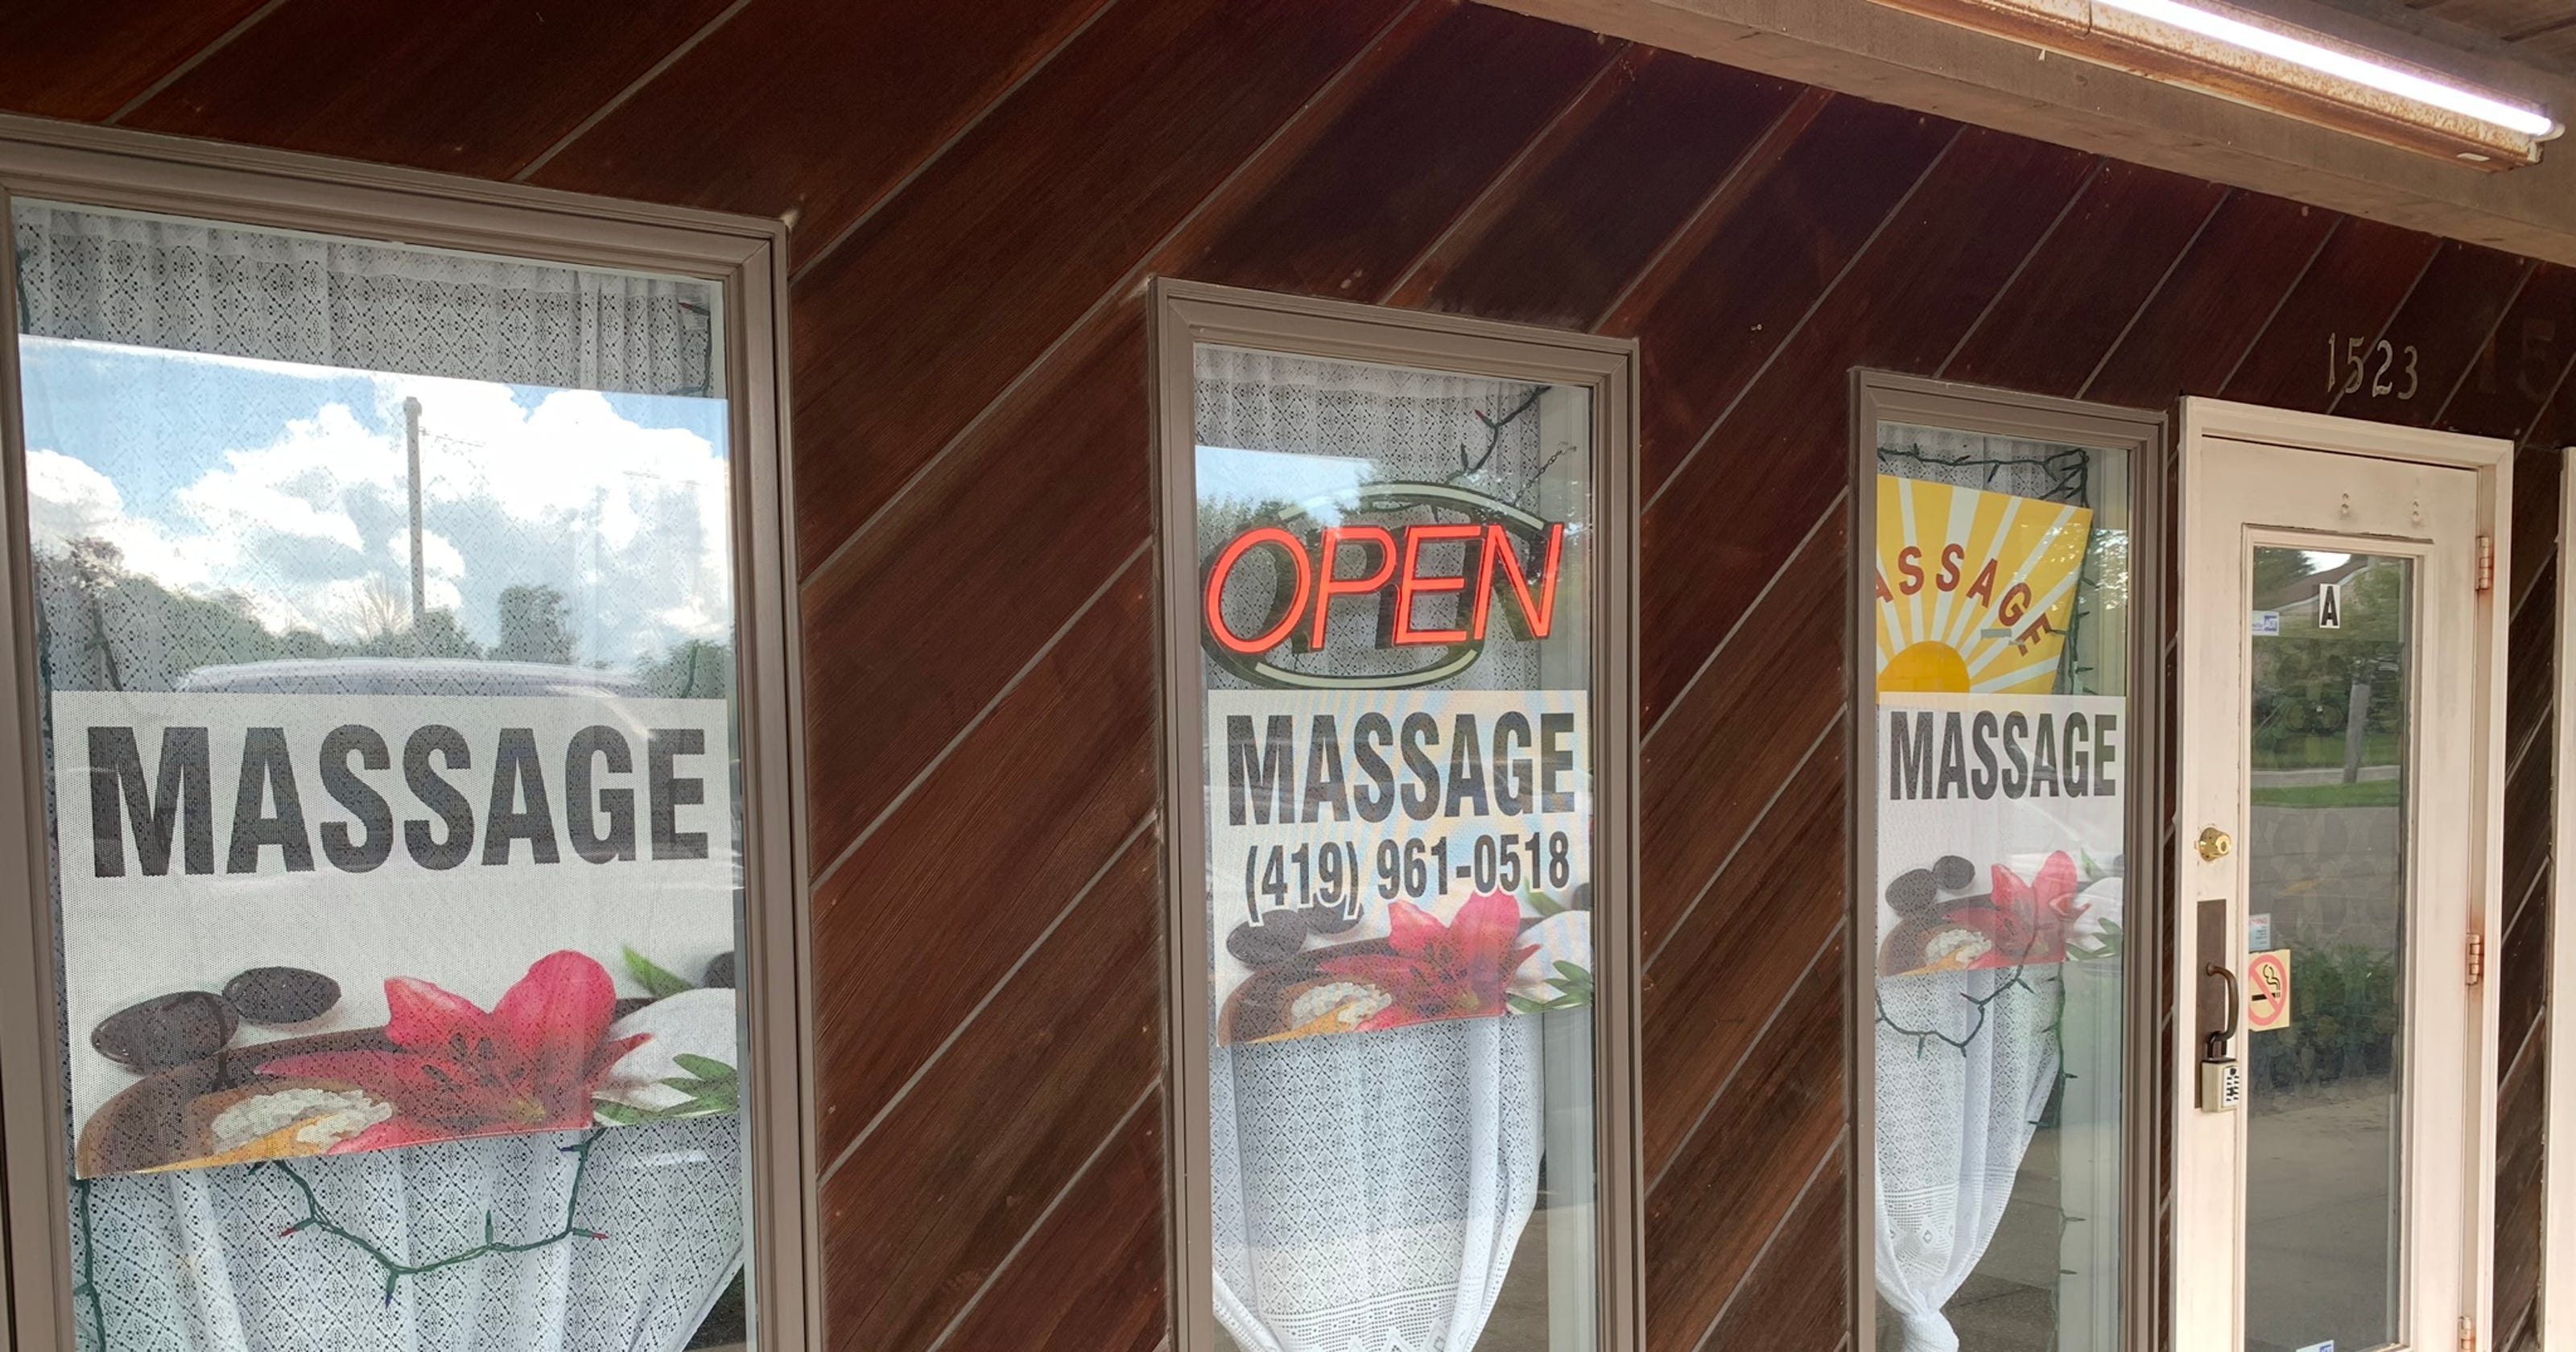 Mansfield Massage Parlor Among 16 Searched In State Prostitution Probe